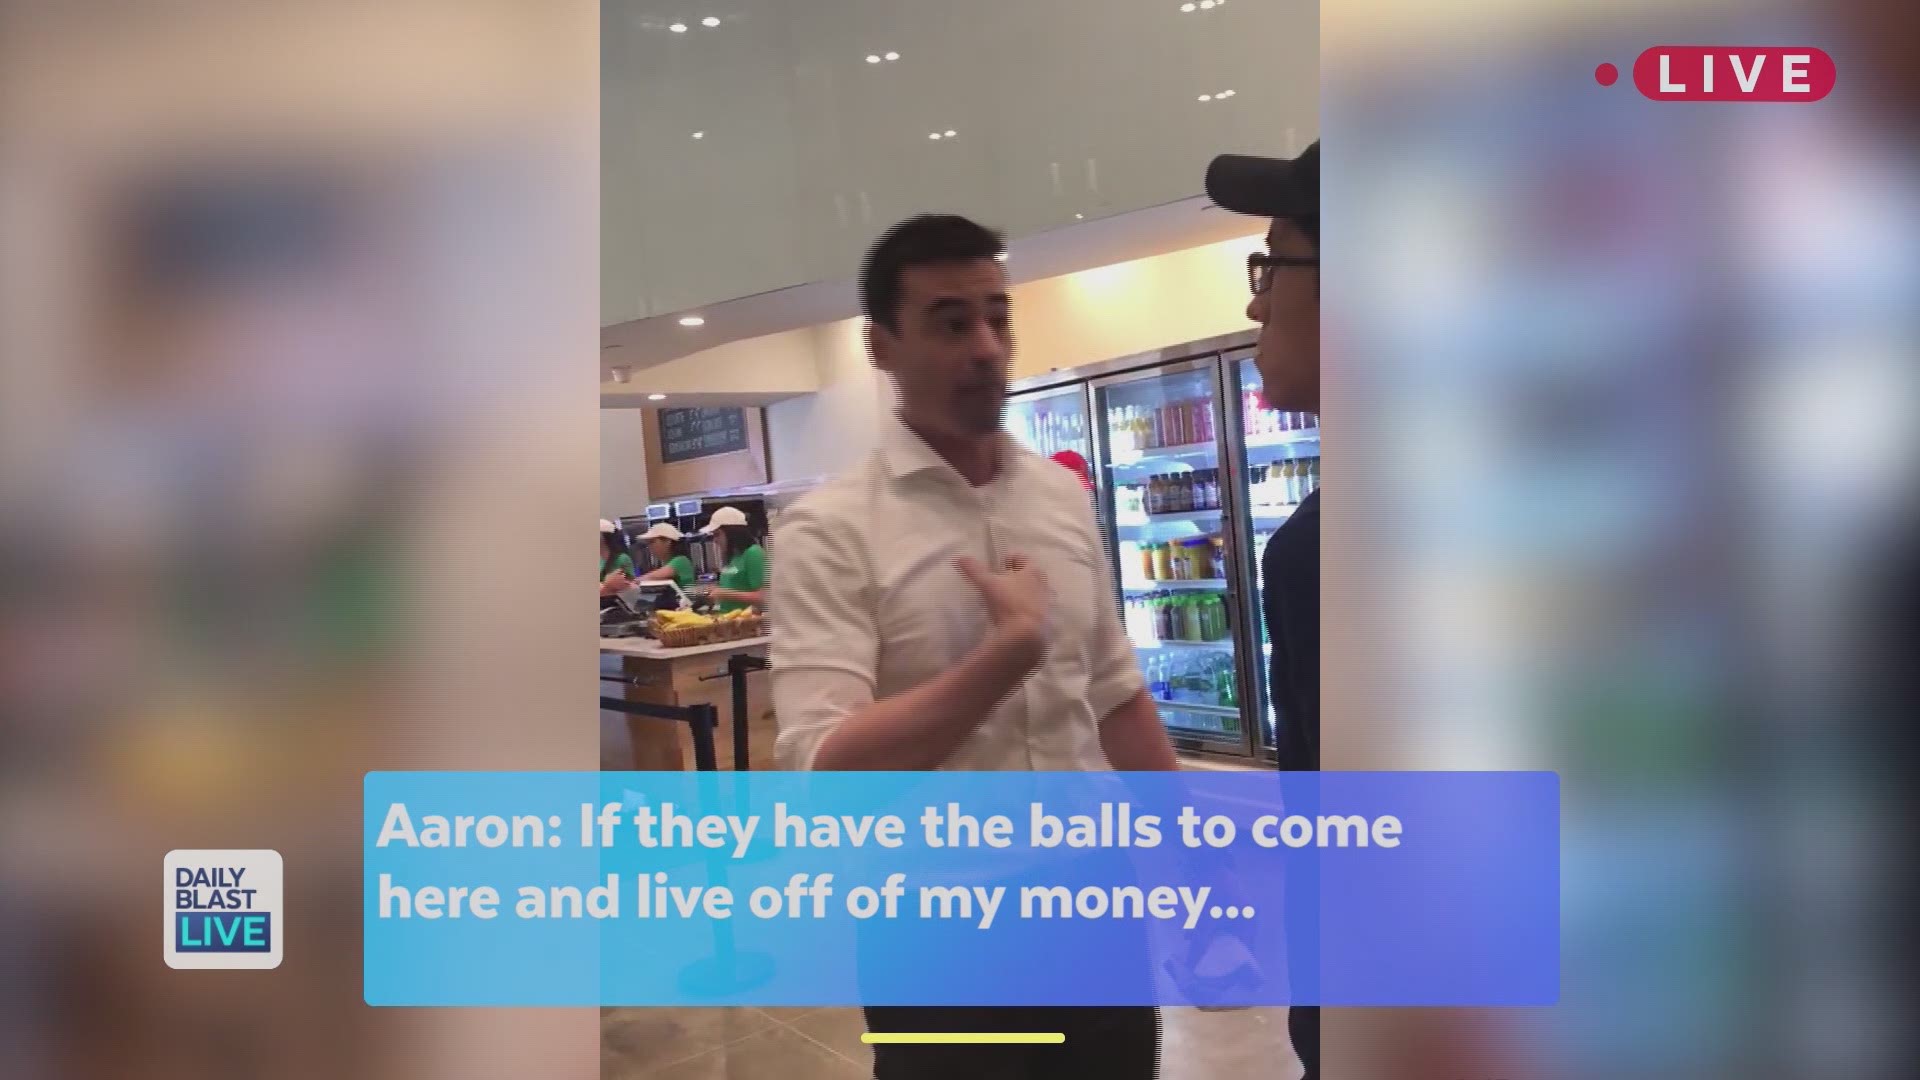 New York City lawyer, Aaron Schlossberg, went viral for his heated rant against Spanish-speaking workers at a caf�. Since the video, Schlossberg has received heavy criticism and is now apologizing for his remarks. He tweeted his apology saying he is deepl